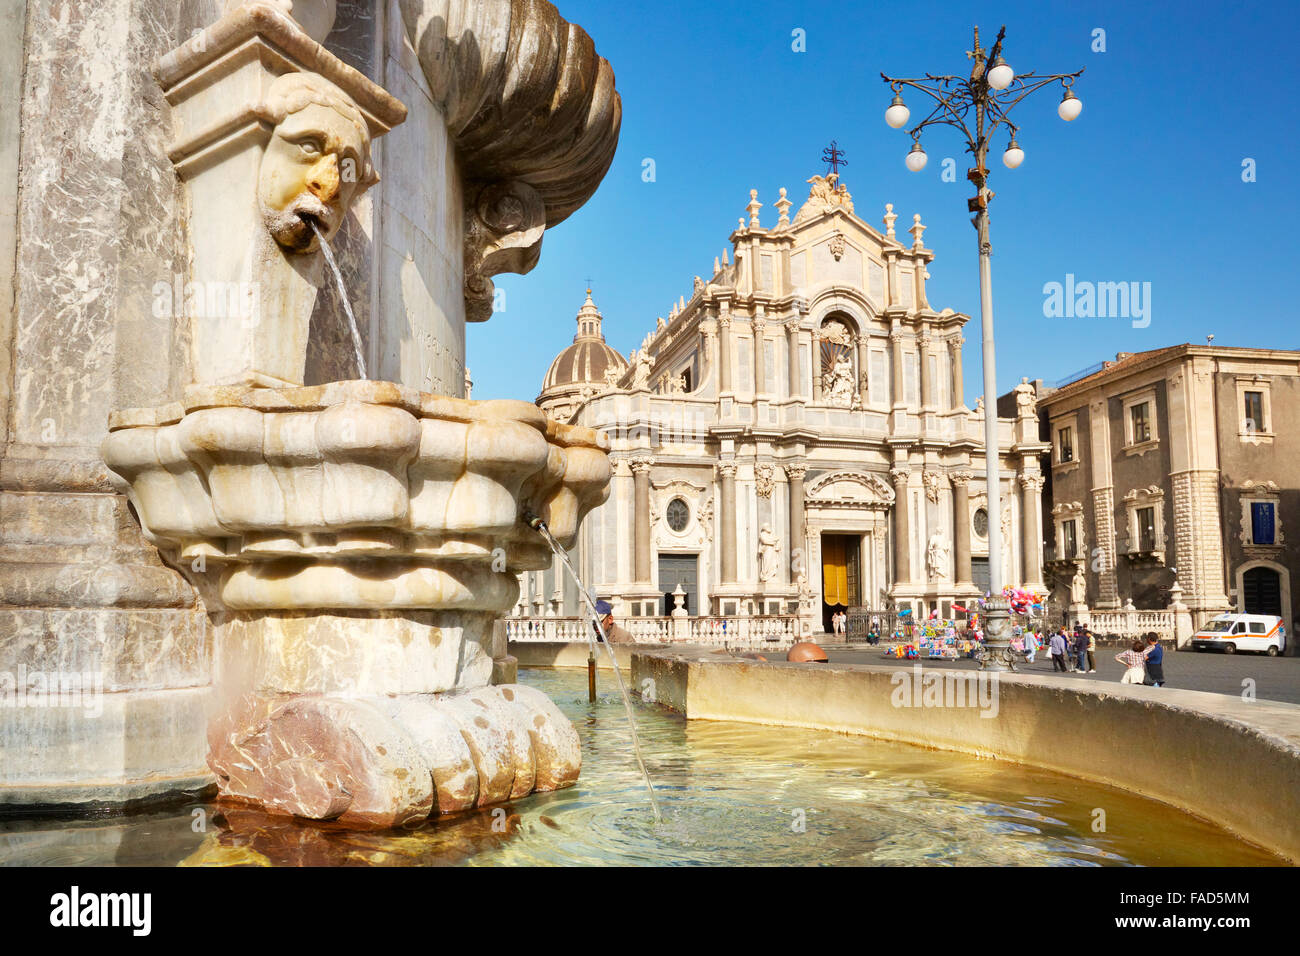 Catania - Fountain of the elephant and Cathedral of Sant Agata, Sicily, Italy Stock Photo